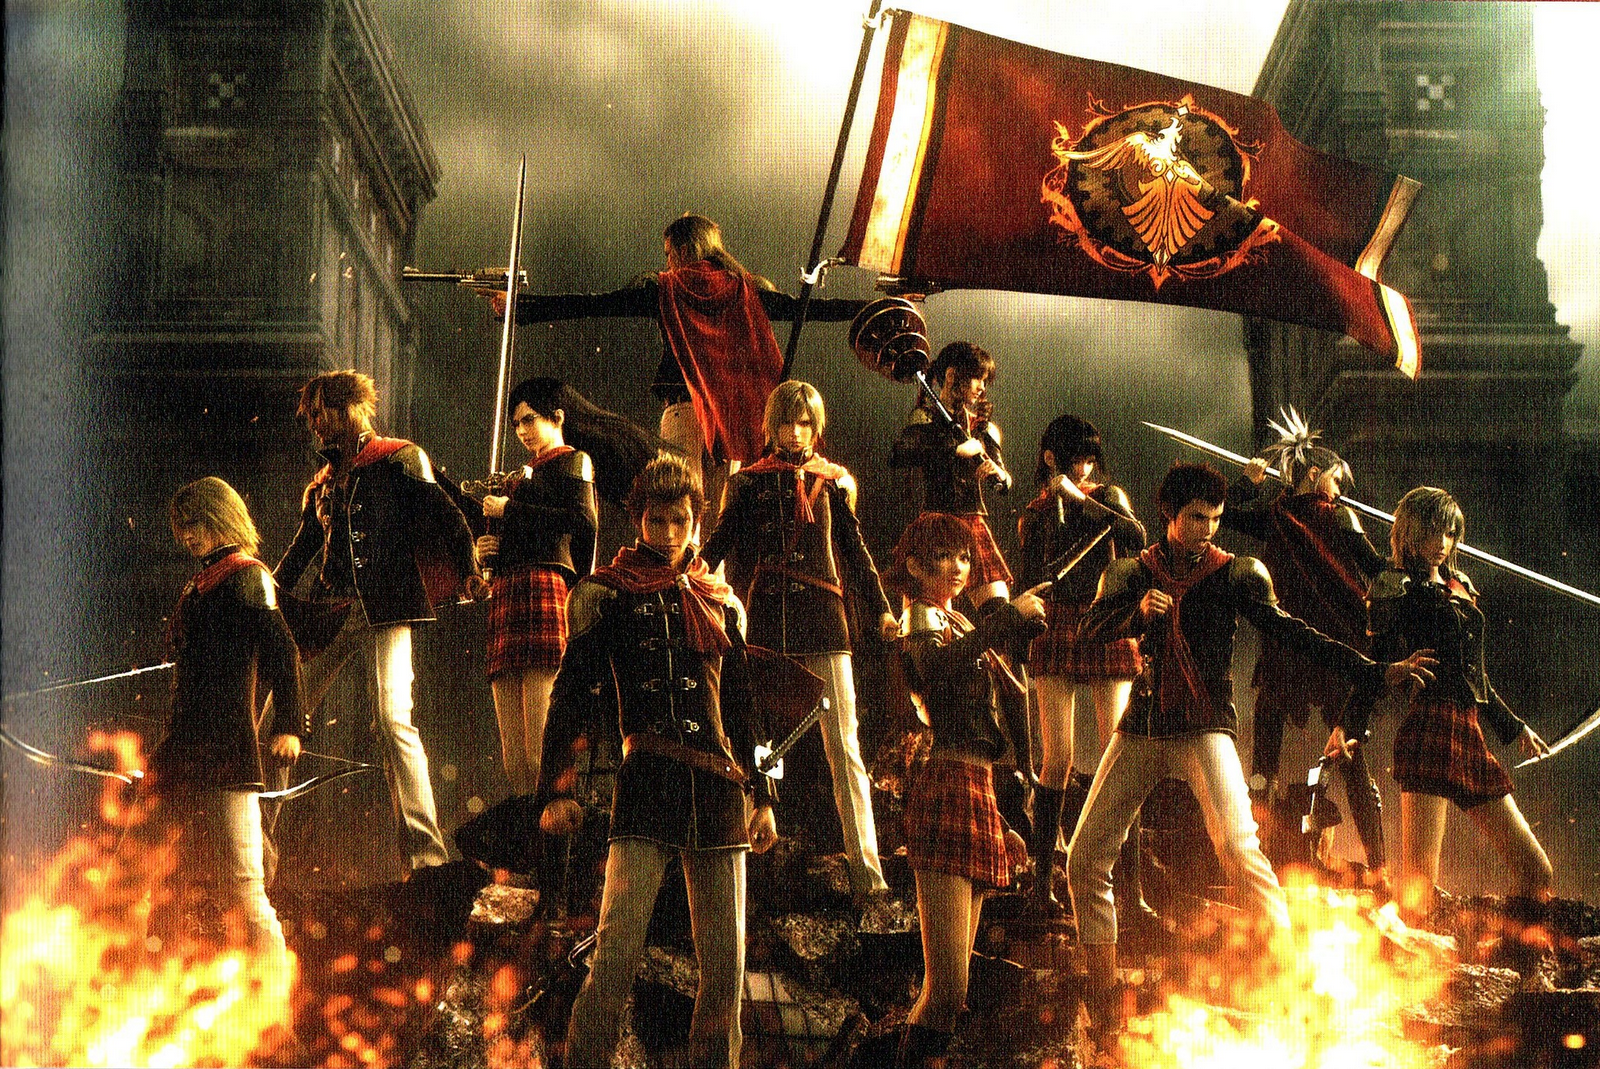 Final Fantasy Type-0 HD Backgrounds, Compatible - PC, Mobile, Gadgets| 1600x1069 px